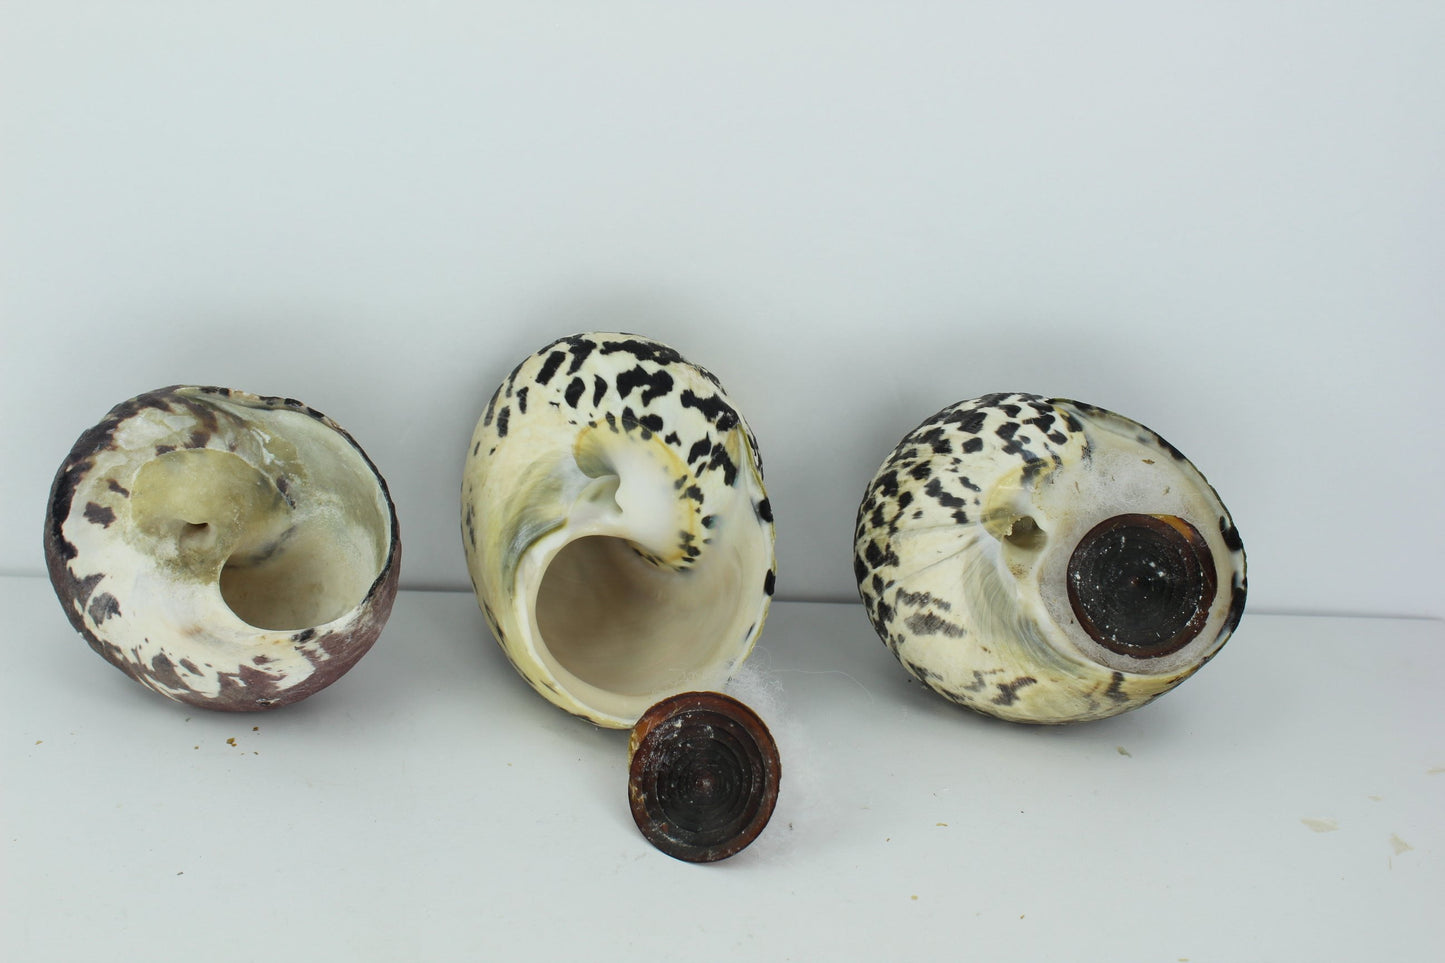 Florida 3 Vintage Turbo Magpie Natural Shells 3"  2 3/4" Operculums Estate Collection Shell Art Collectibles older collection